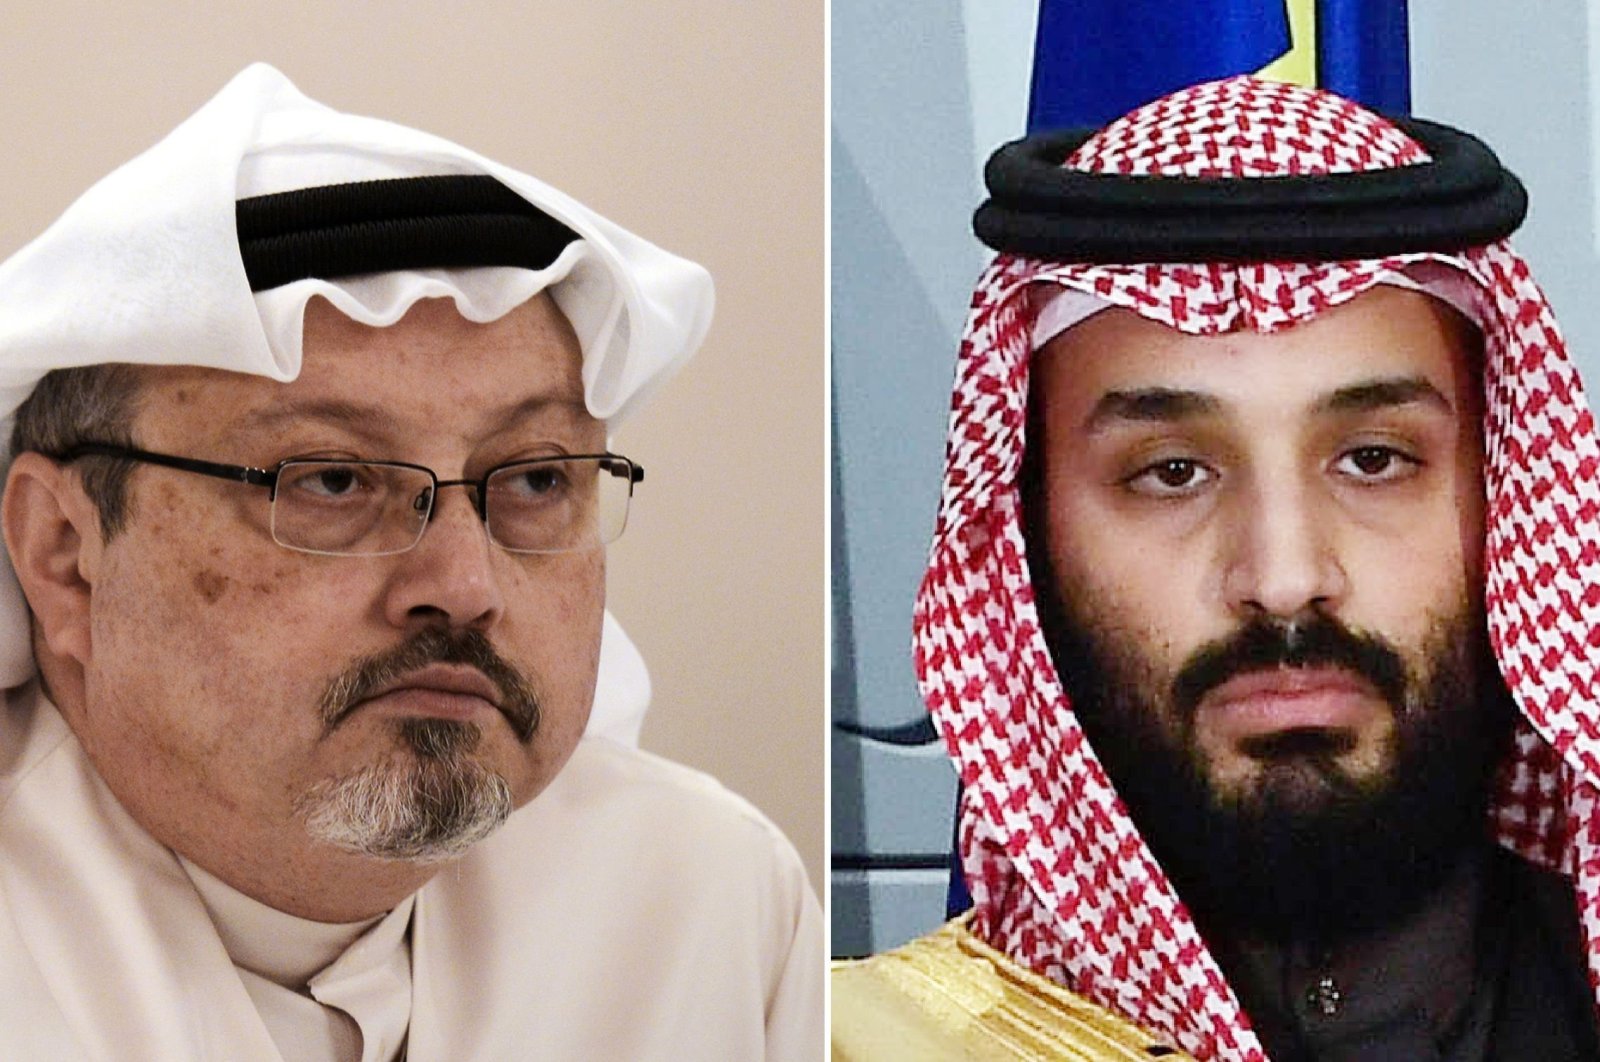 This combination of pictures created on June 20, 2019 shows a file photo taken on December 15, 2014 of Saudi journalist Jamal Khashoggi (L) during a press conference in the Bahraini capital Manama and a file photo taken on April 12, 2018 of Saudi Arabia's crown prince Mohammed bin Salman poses at La Moncloa palace in Madrid. (AFP Photo)